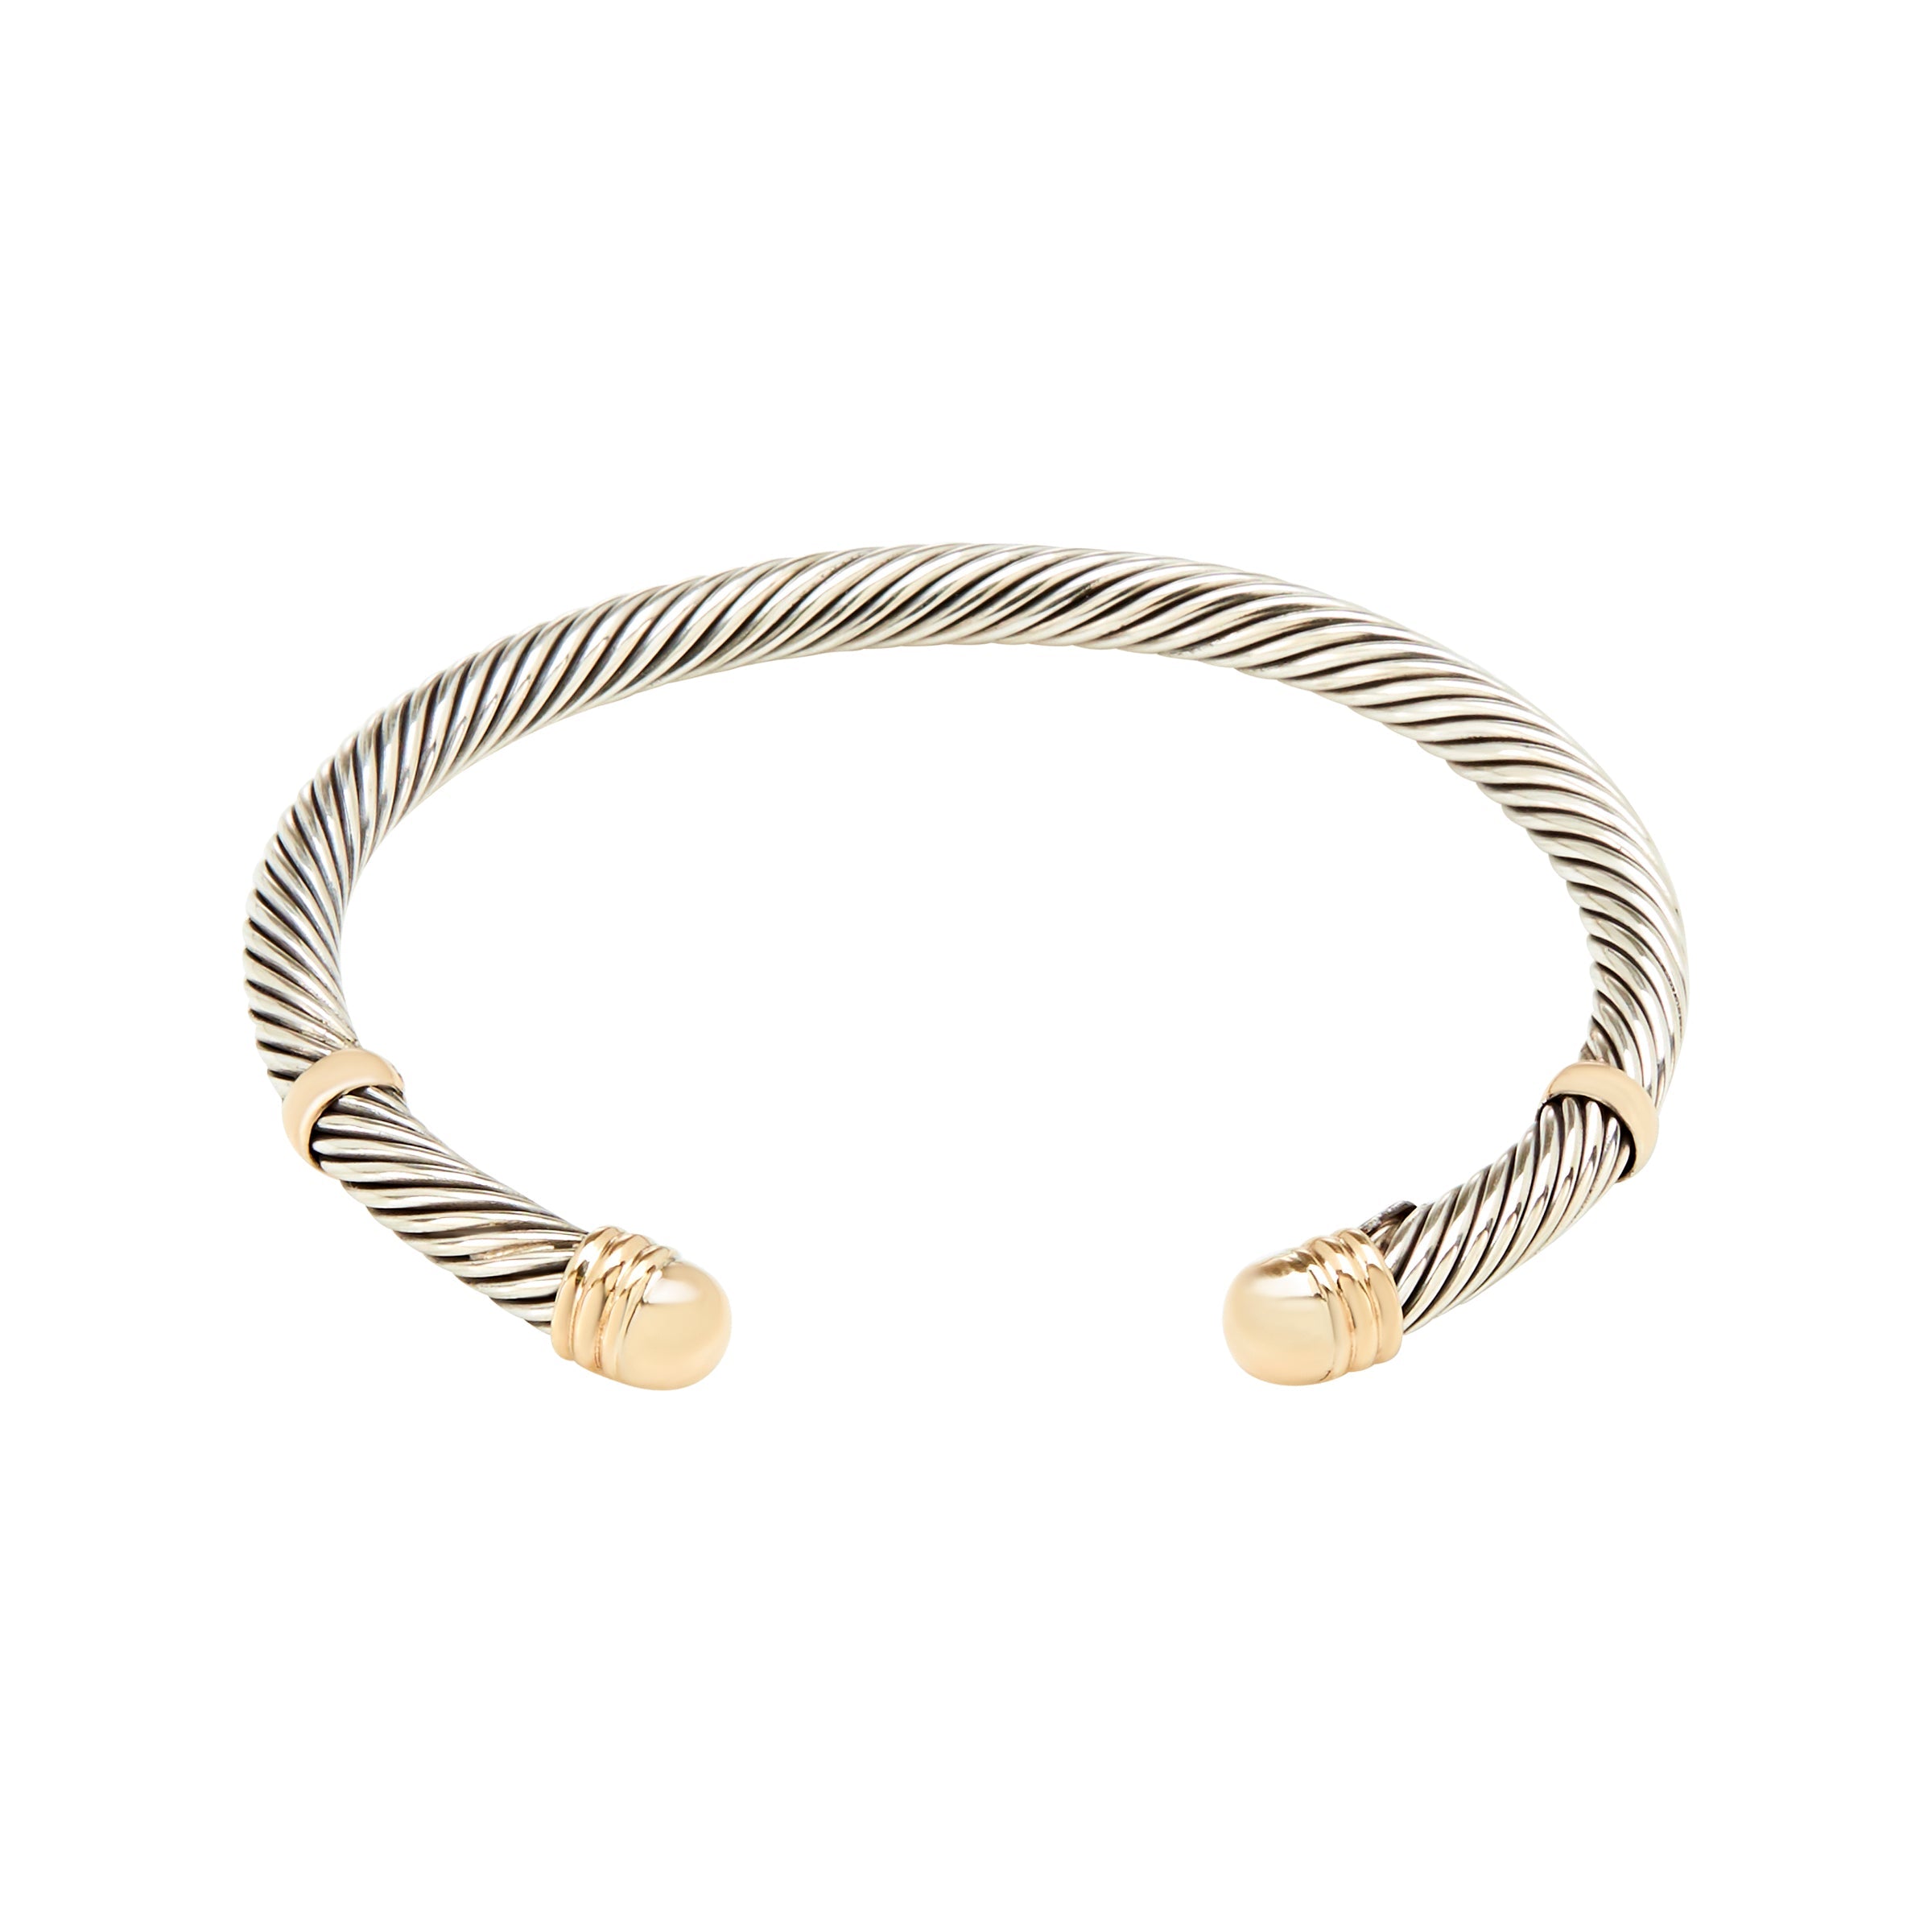 EDEN ROC CUFF BRACELET - Sterling Silver and 14k Yellow Gold-Tayroni